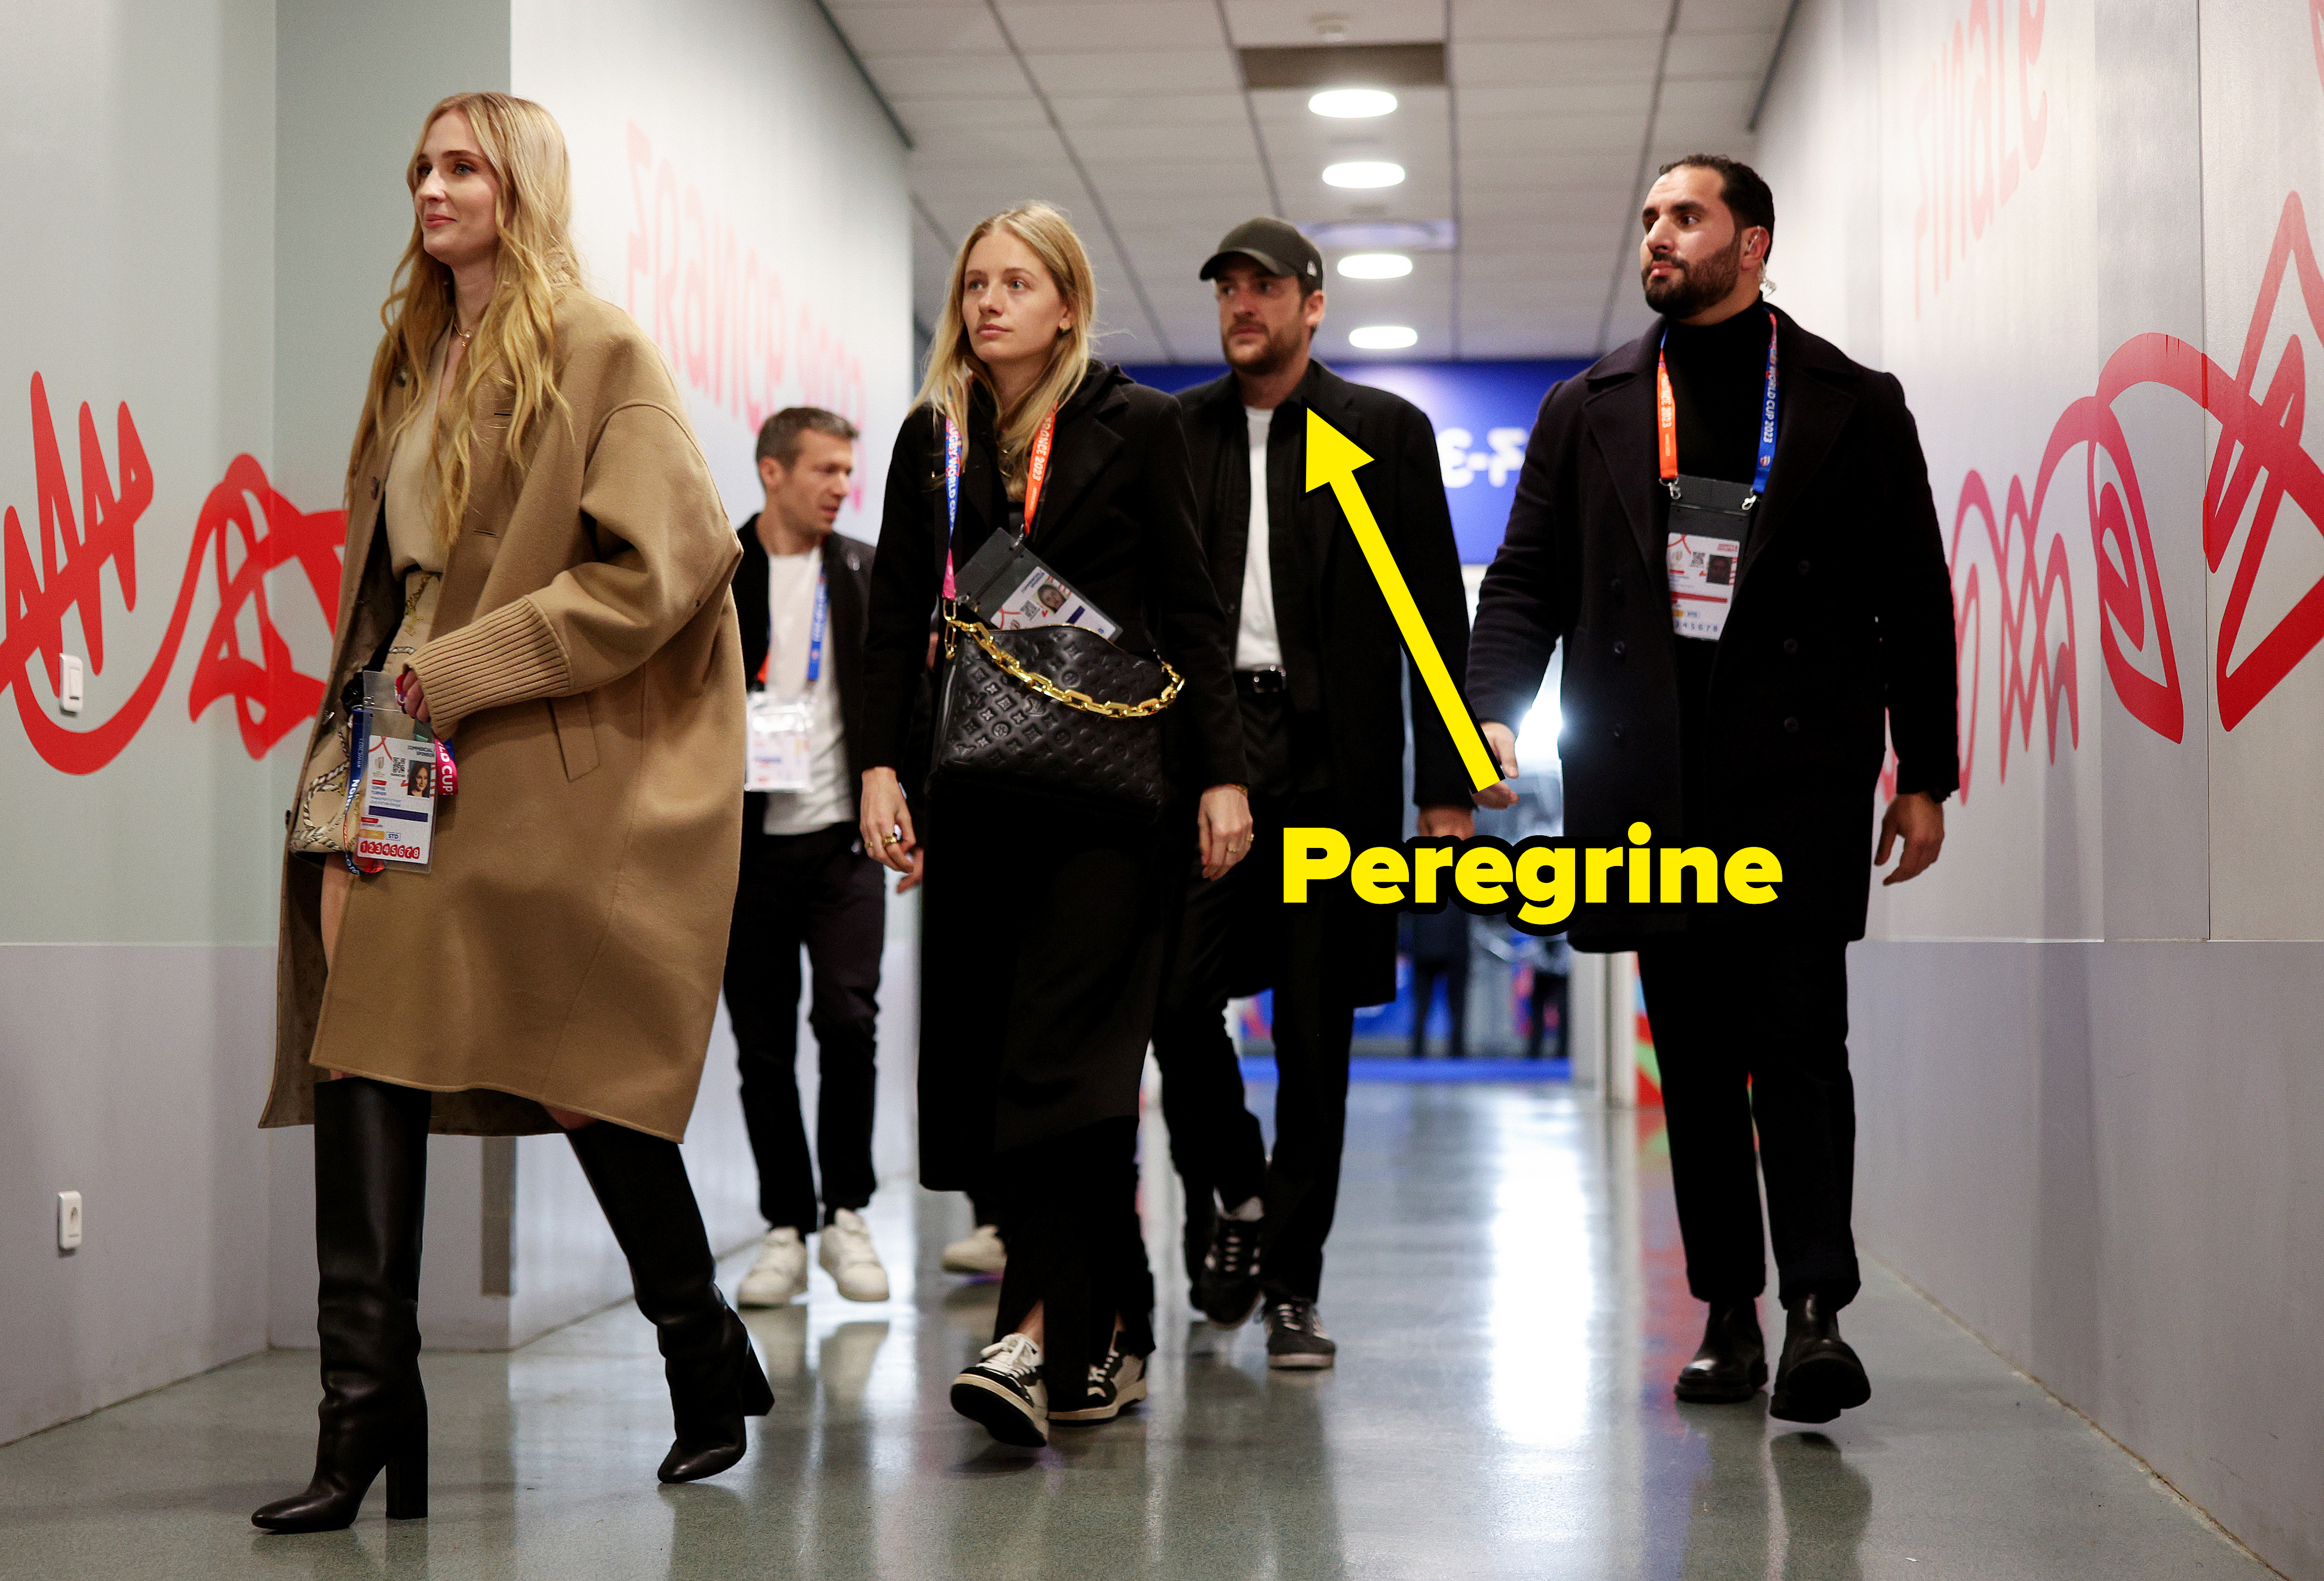 Sophie and Peregrine walking down a hallway with other people